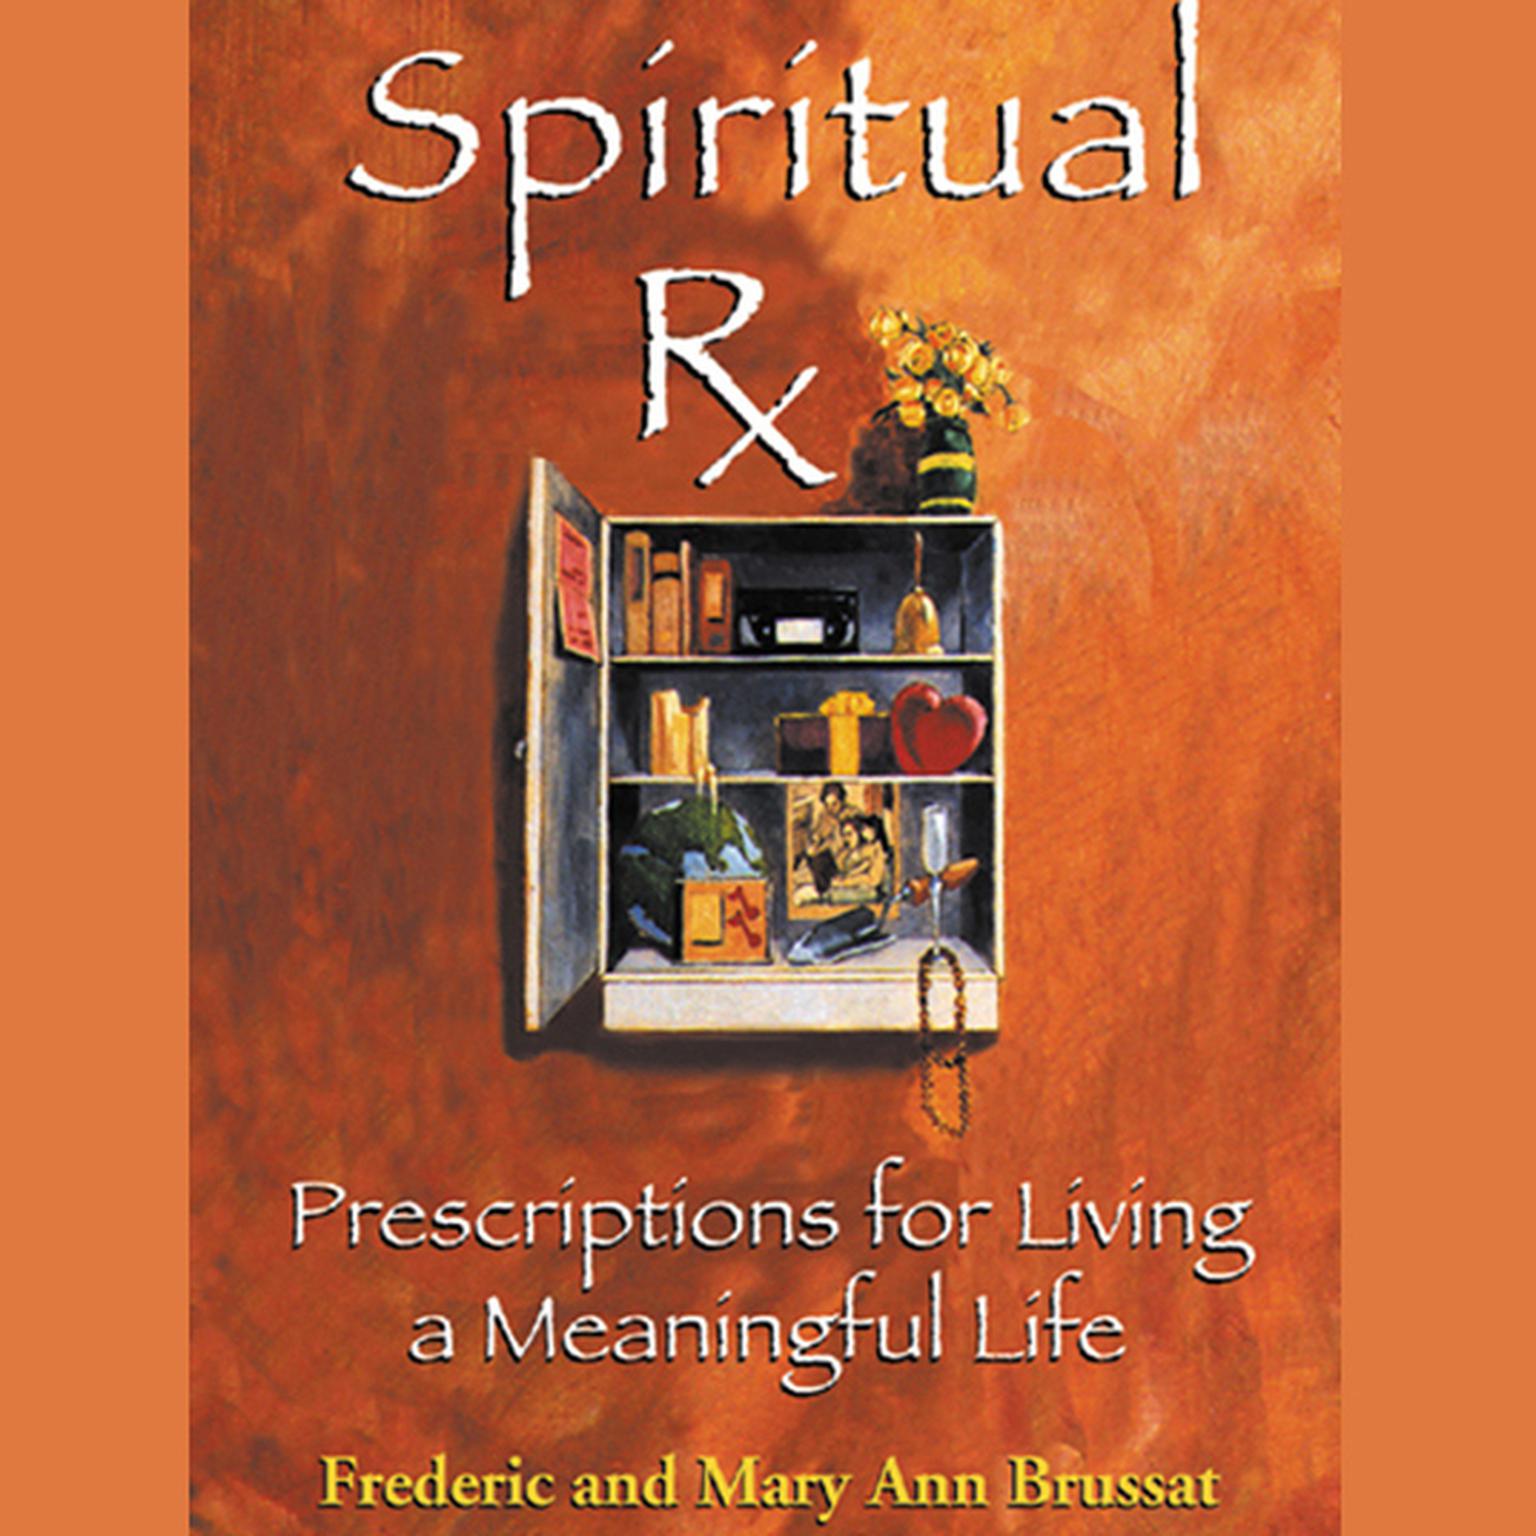 Spiritual Rx (Abridged): Prescriptions for Living a Meaningful Life Audiobook, by Frederic Brussat